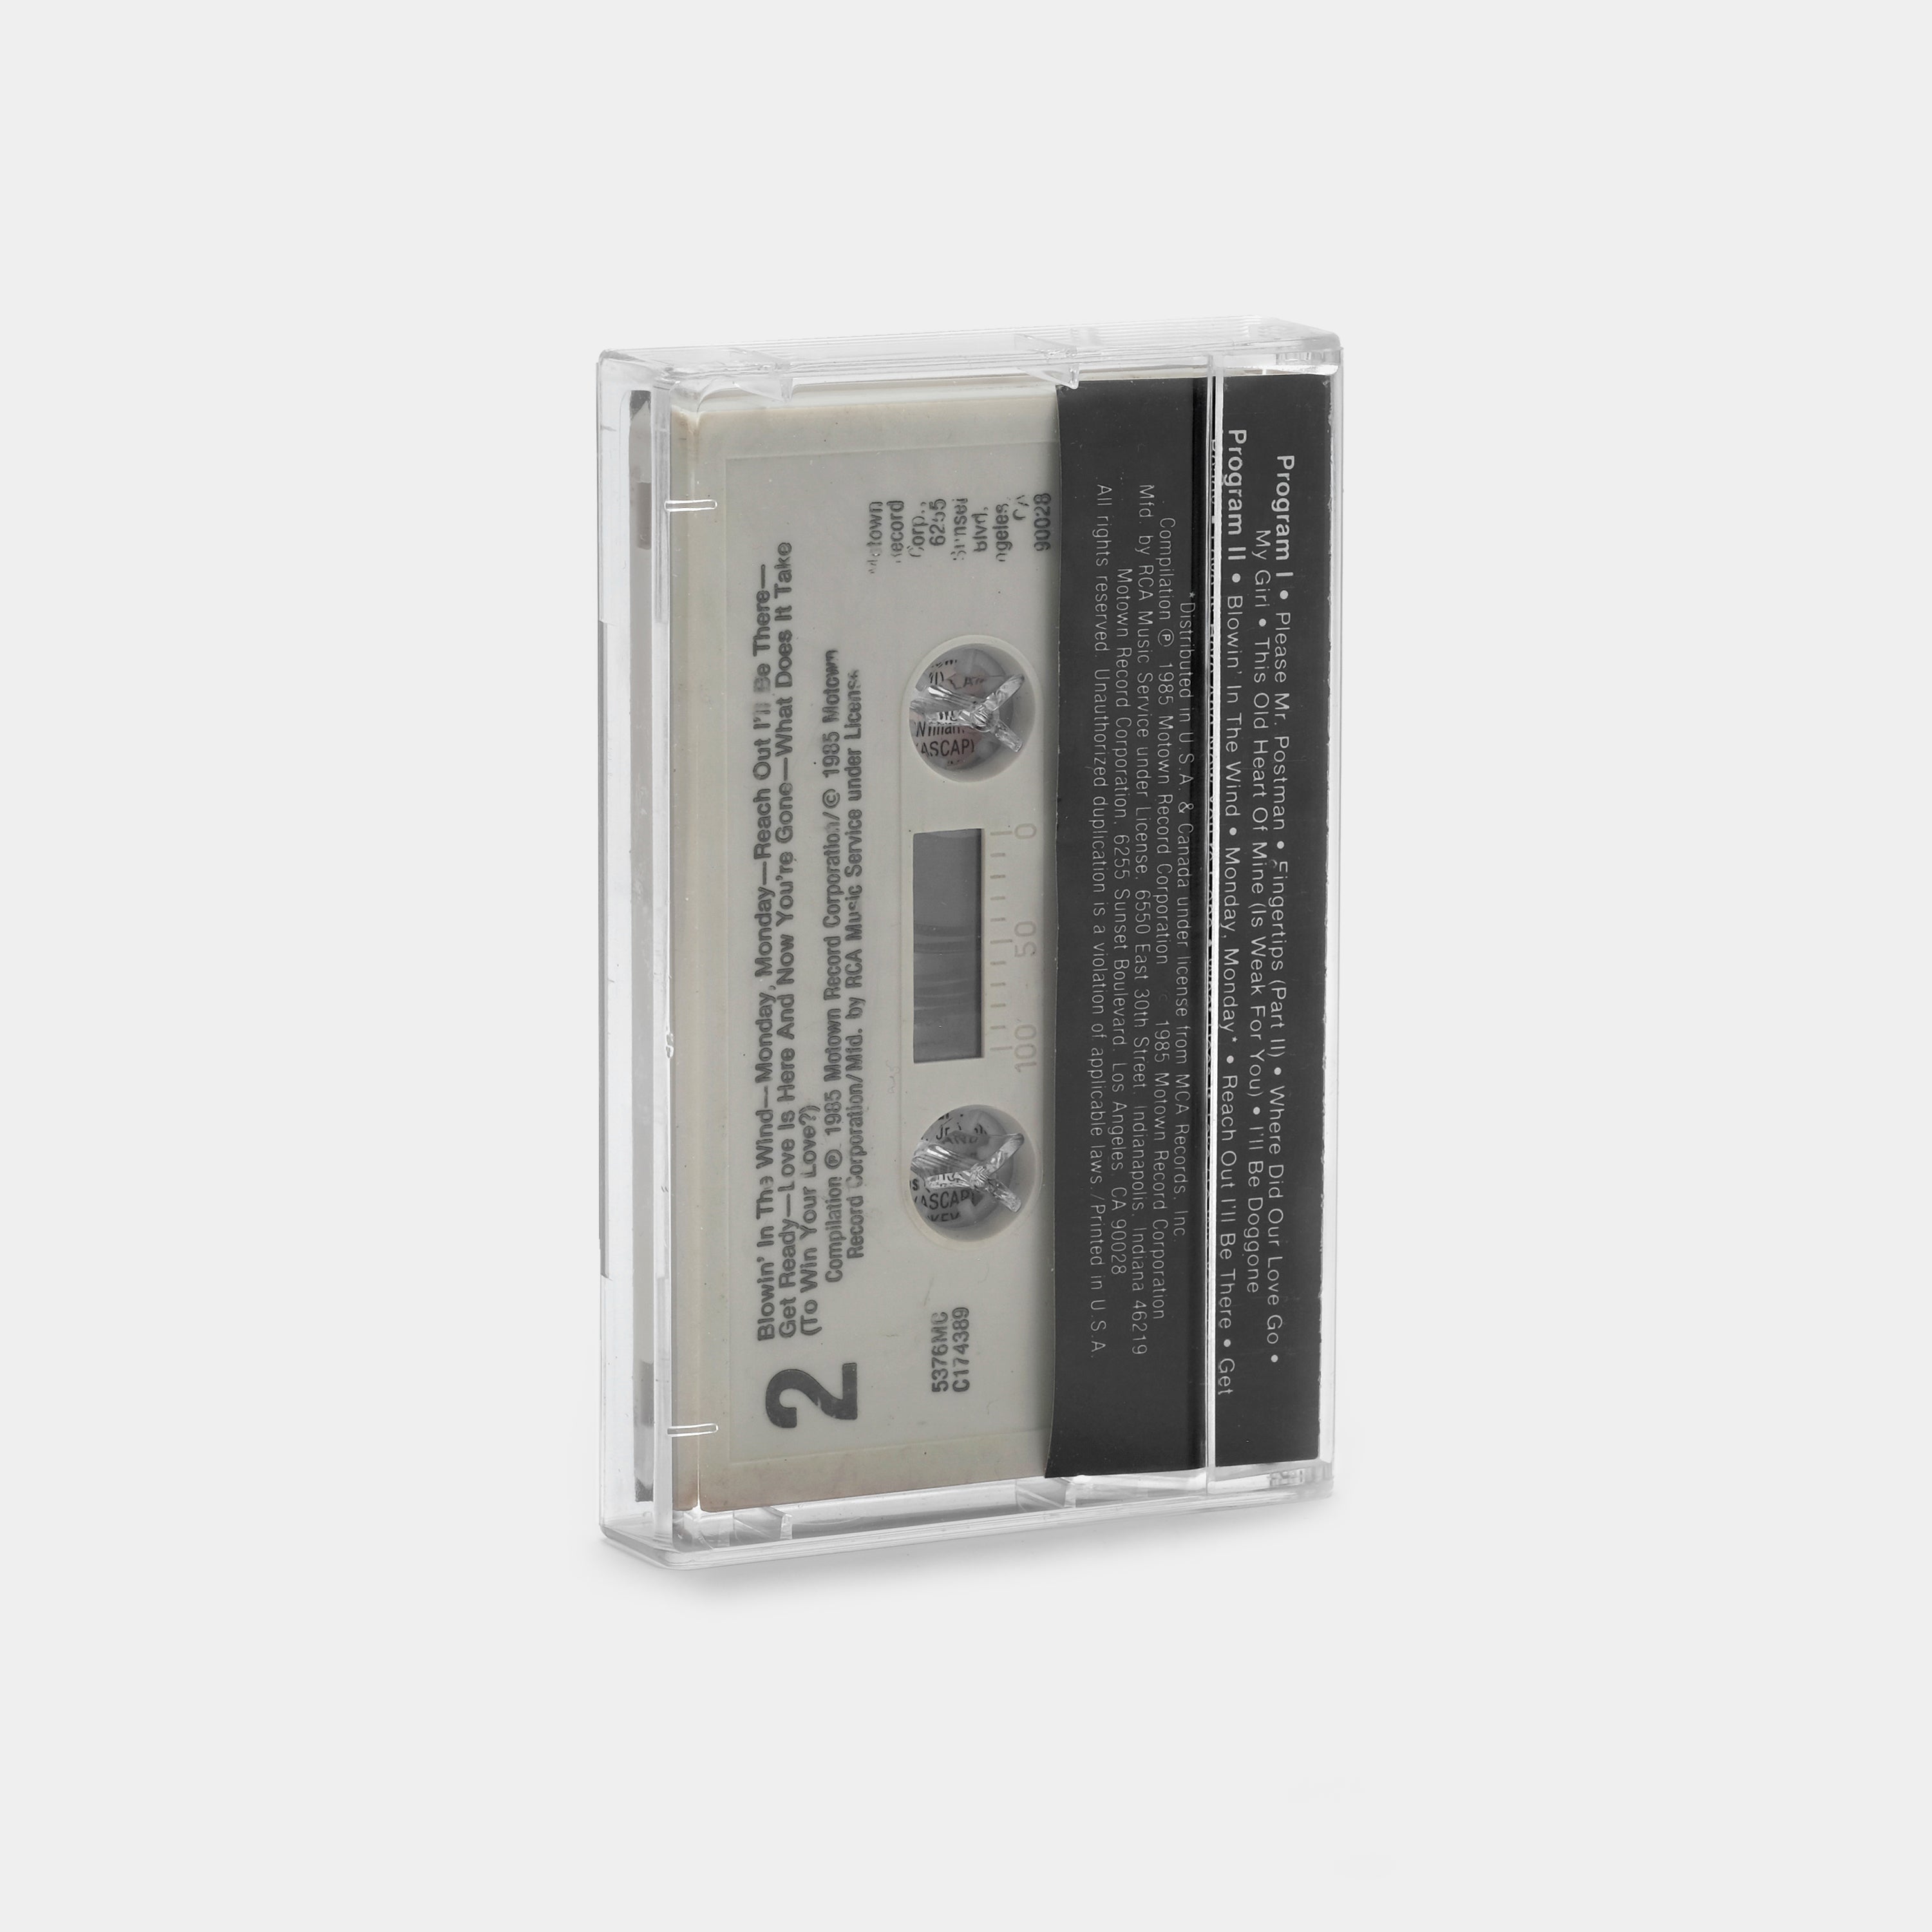 The Good-Feeling Music of the Big Chill Generation Volume 2 Cassette Tape